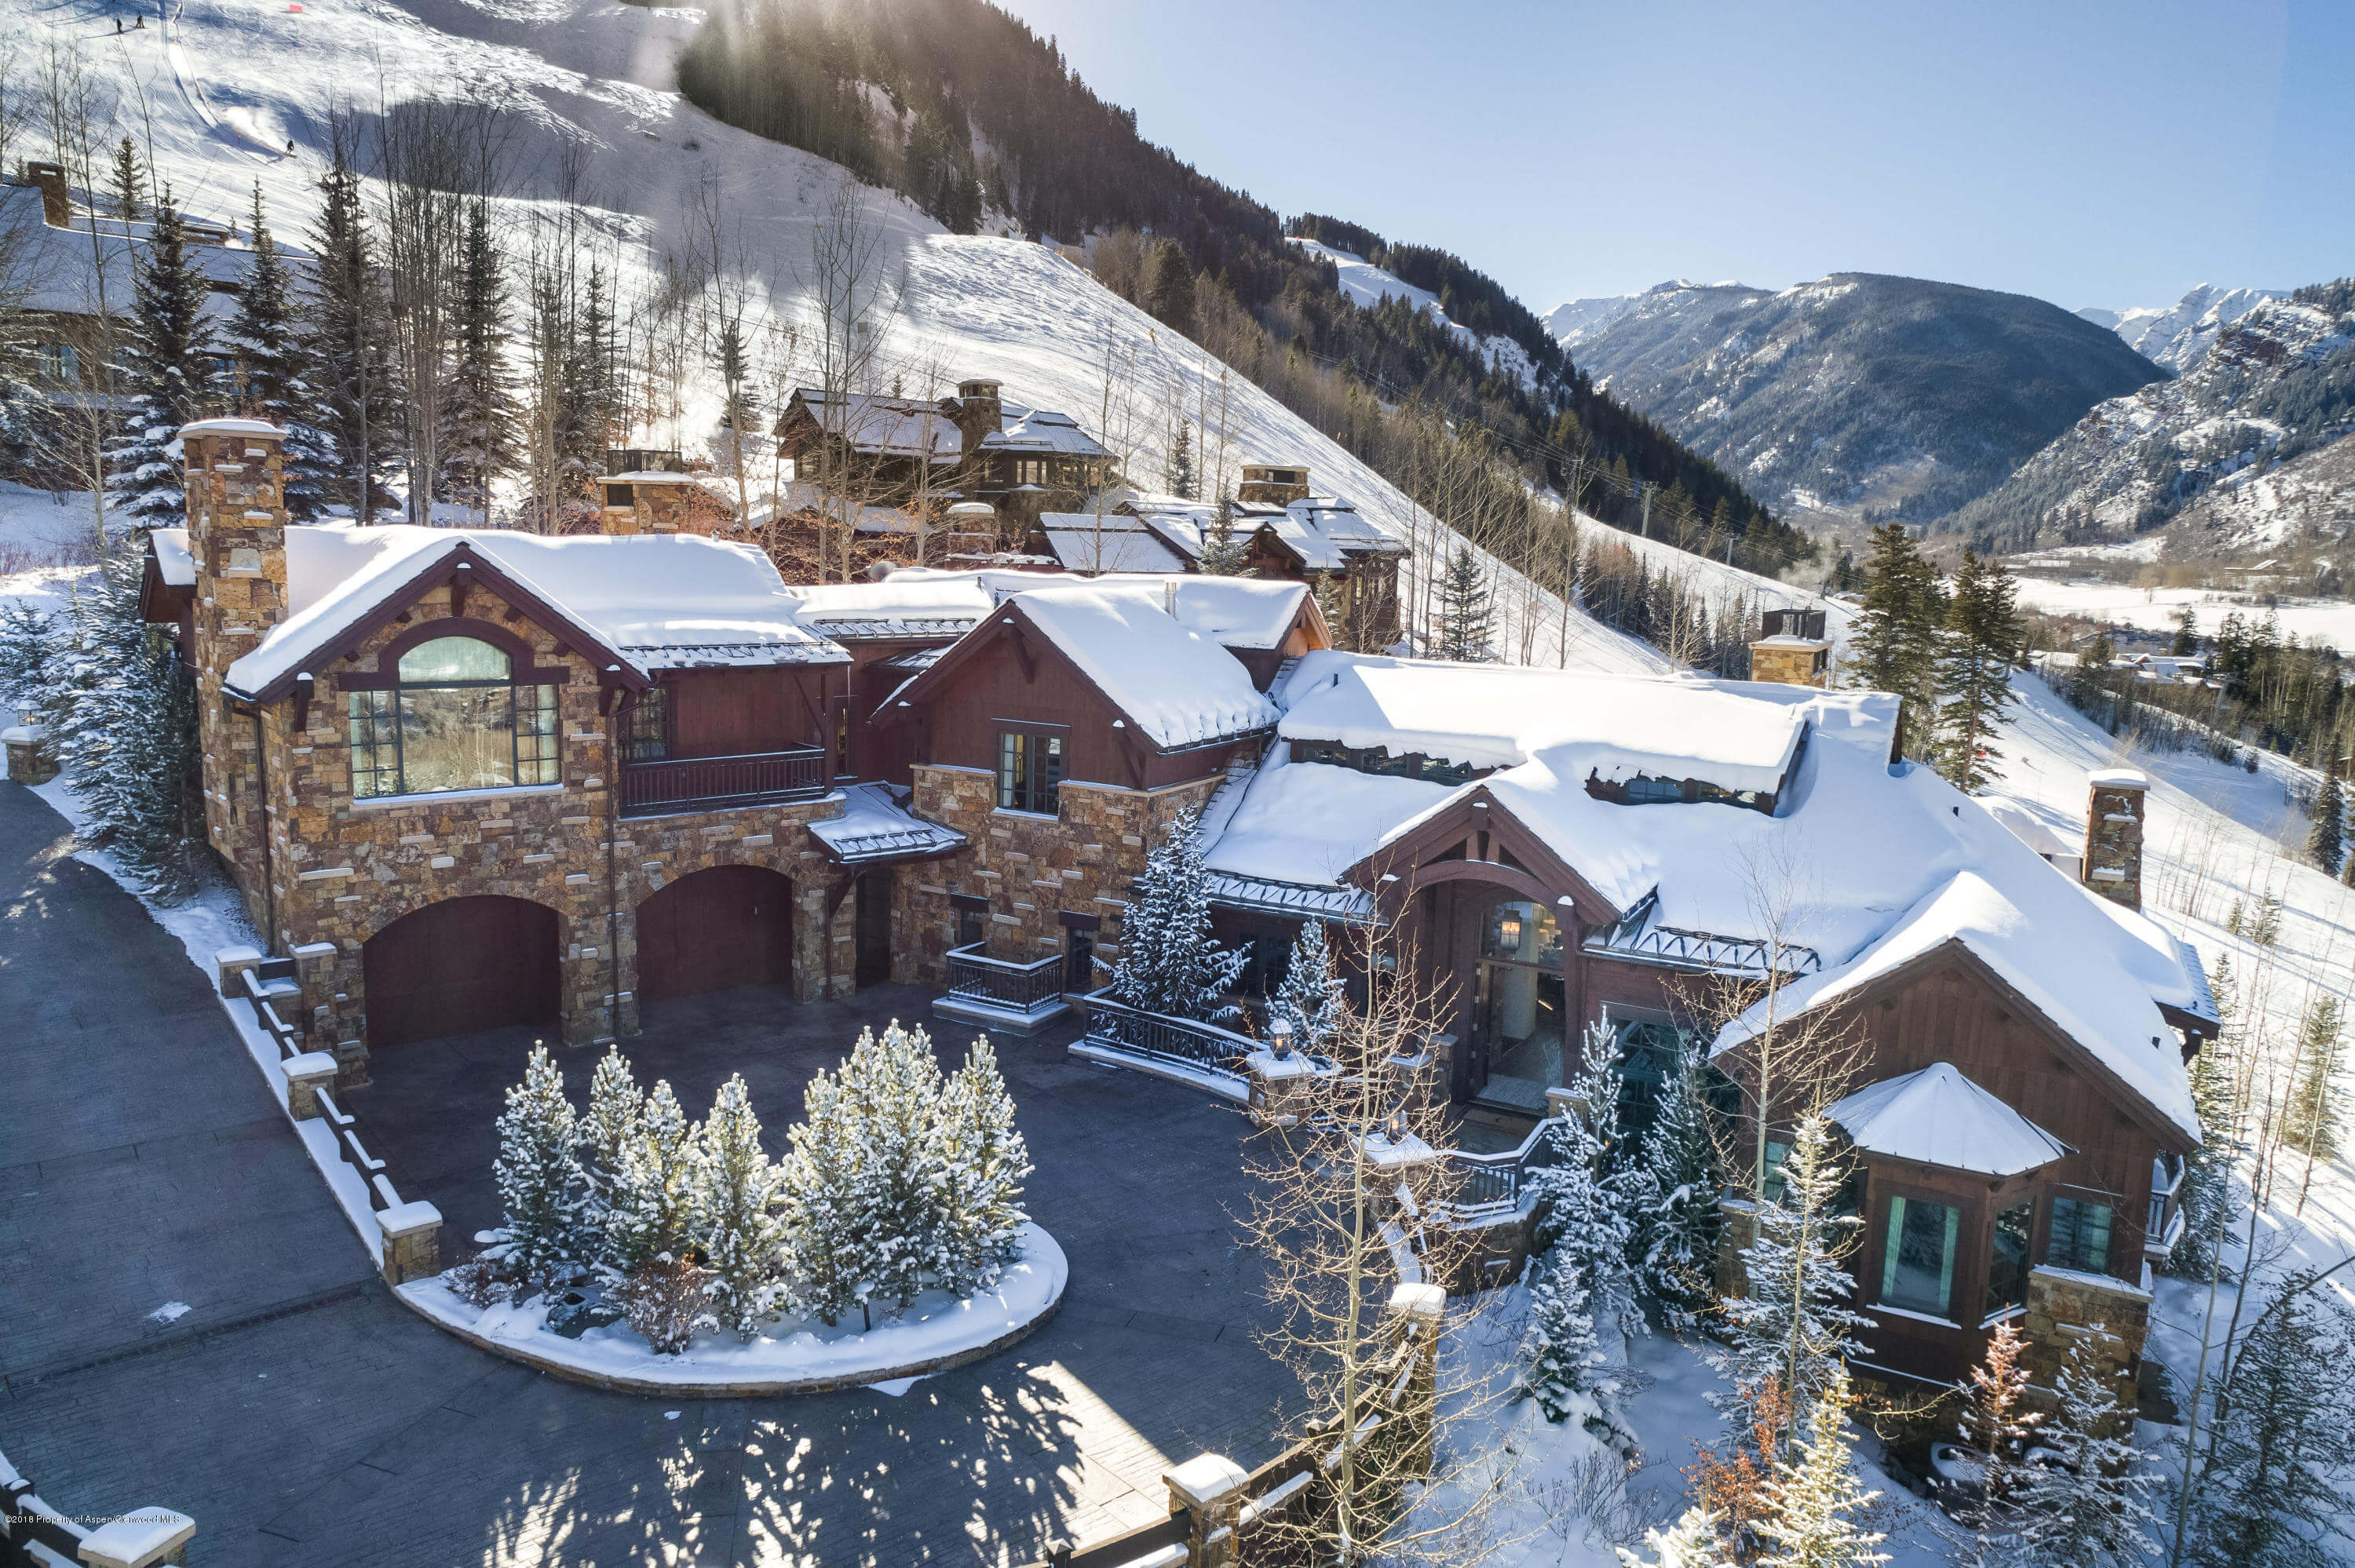 Aspen Highlands Ski-In Out Home at 465 Thunderbowl Ln Sells for Record Highlands Price $17.35M/$1,870 sq ft Furnished Image